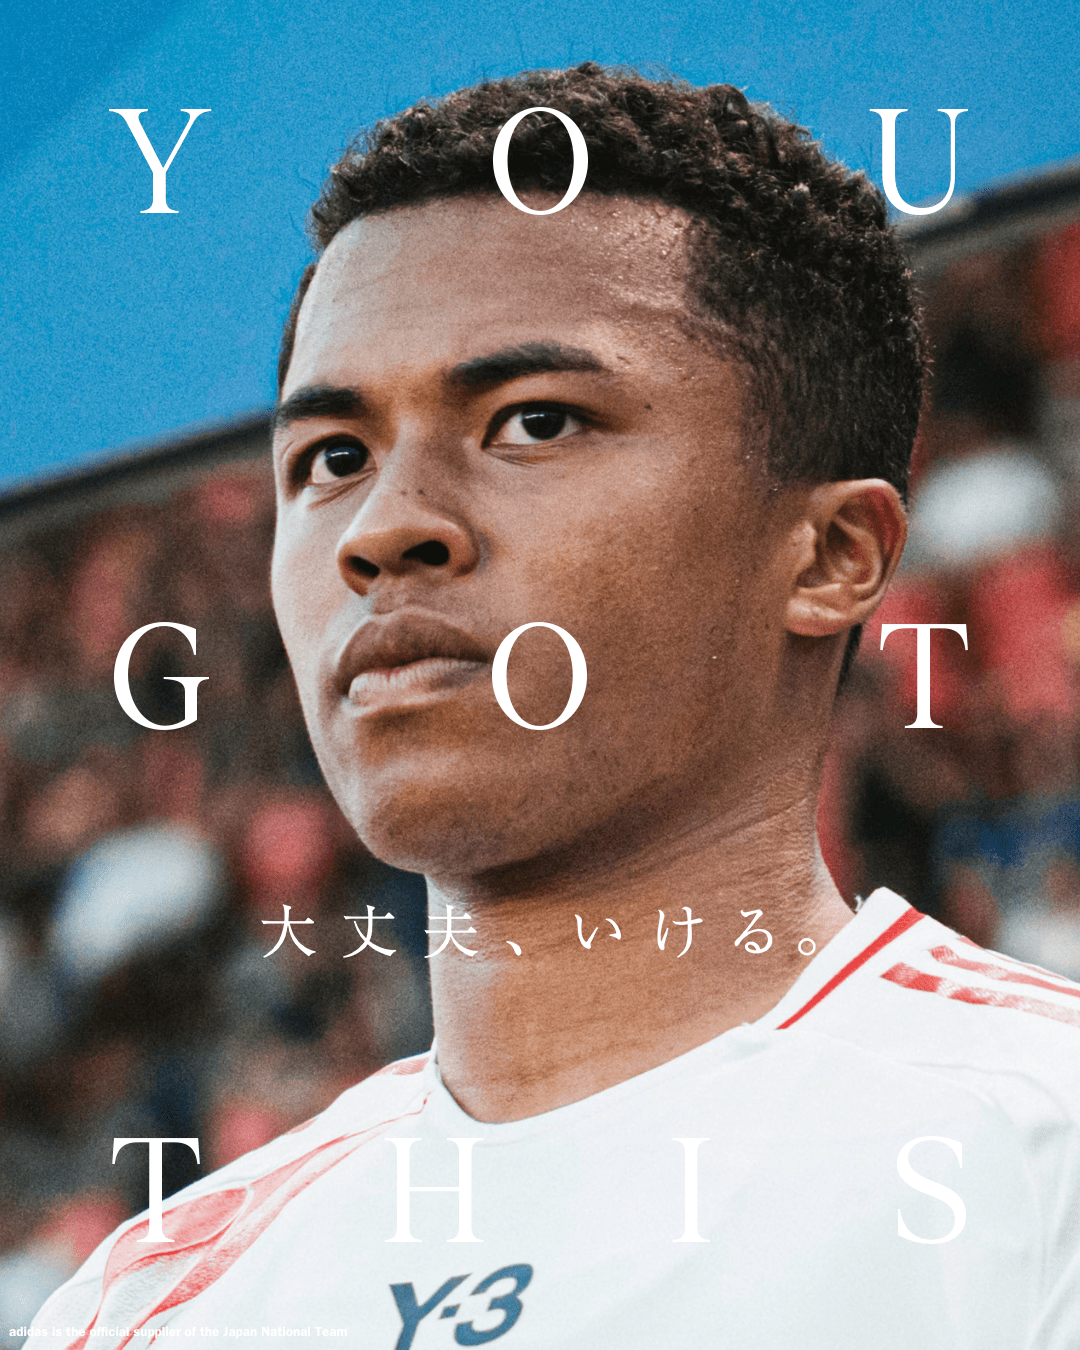 YOU GOT THIS 大丈夫、いける。 adidas is the official supplier of the Japan National Team